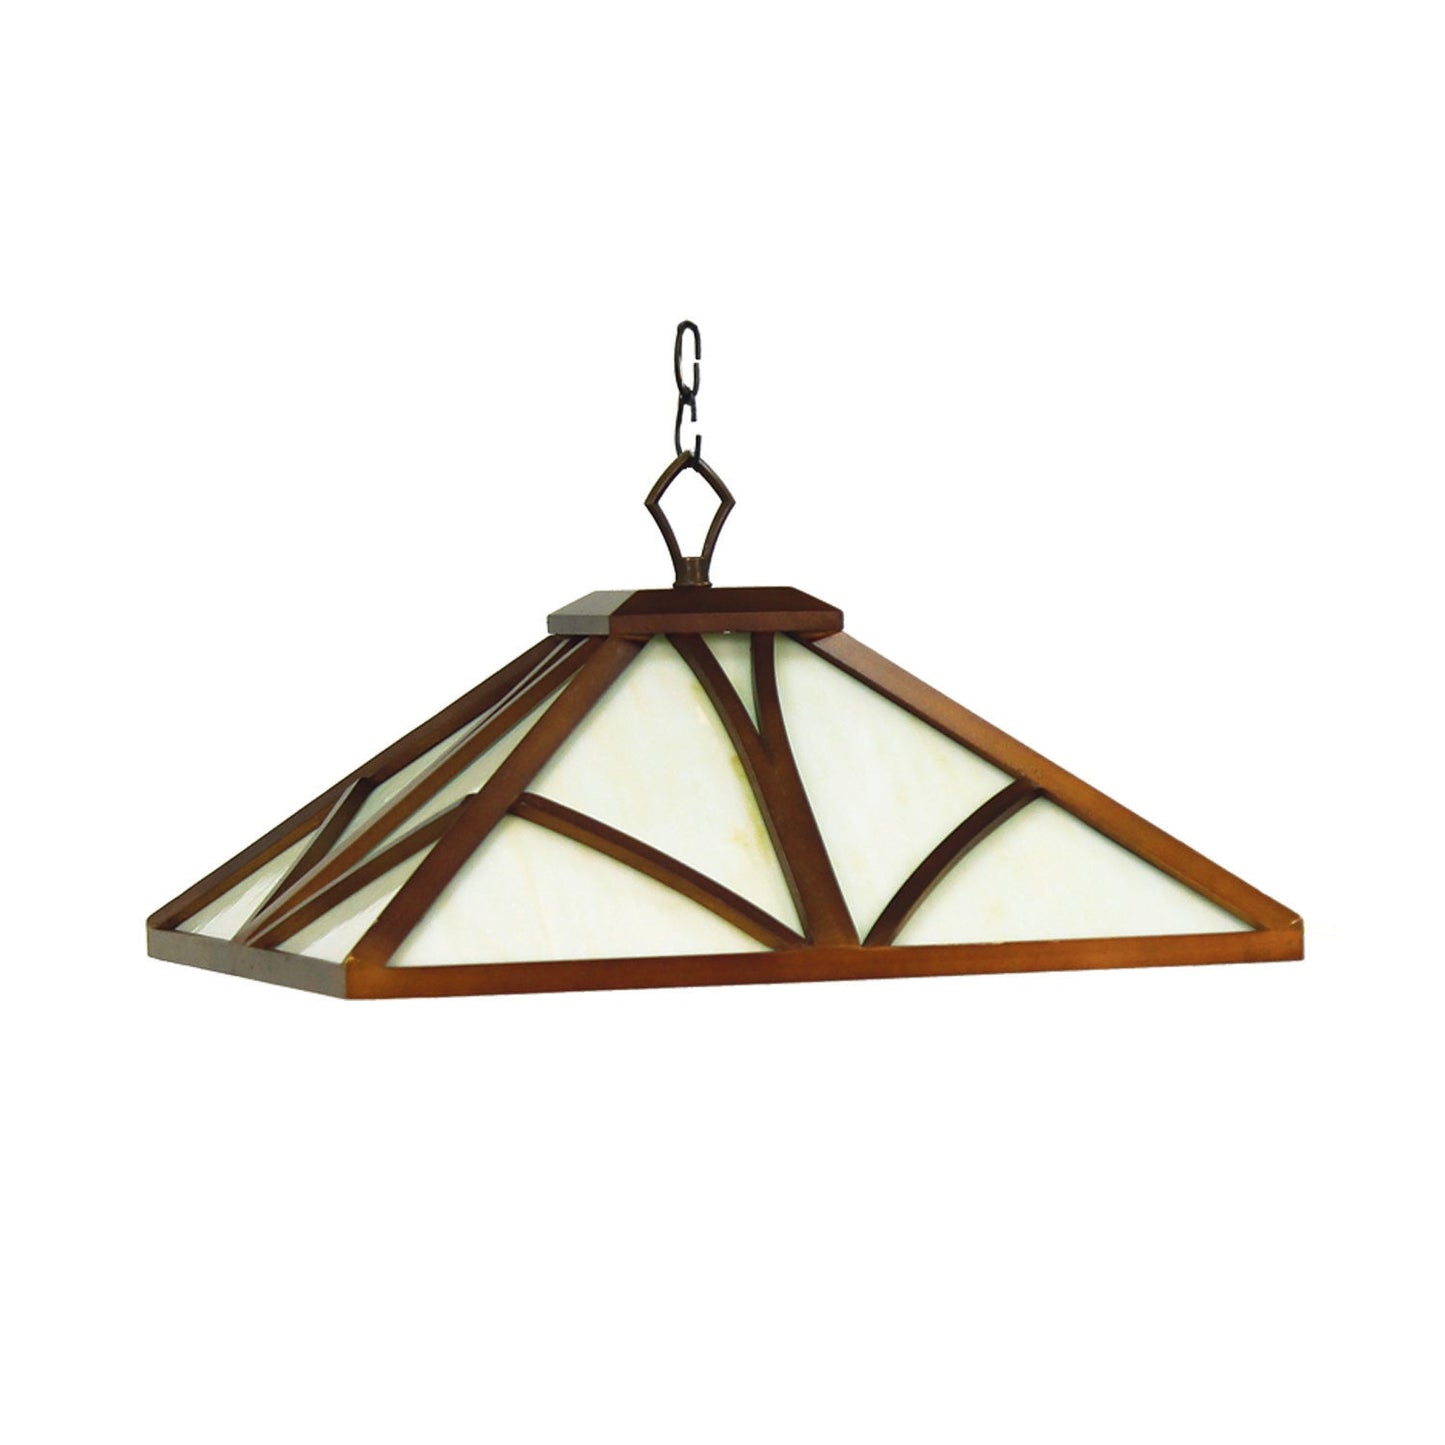 CHATEAU- 17" PENDANT LIGHT-CHESTNUT-Game Table Genie